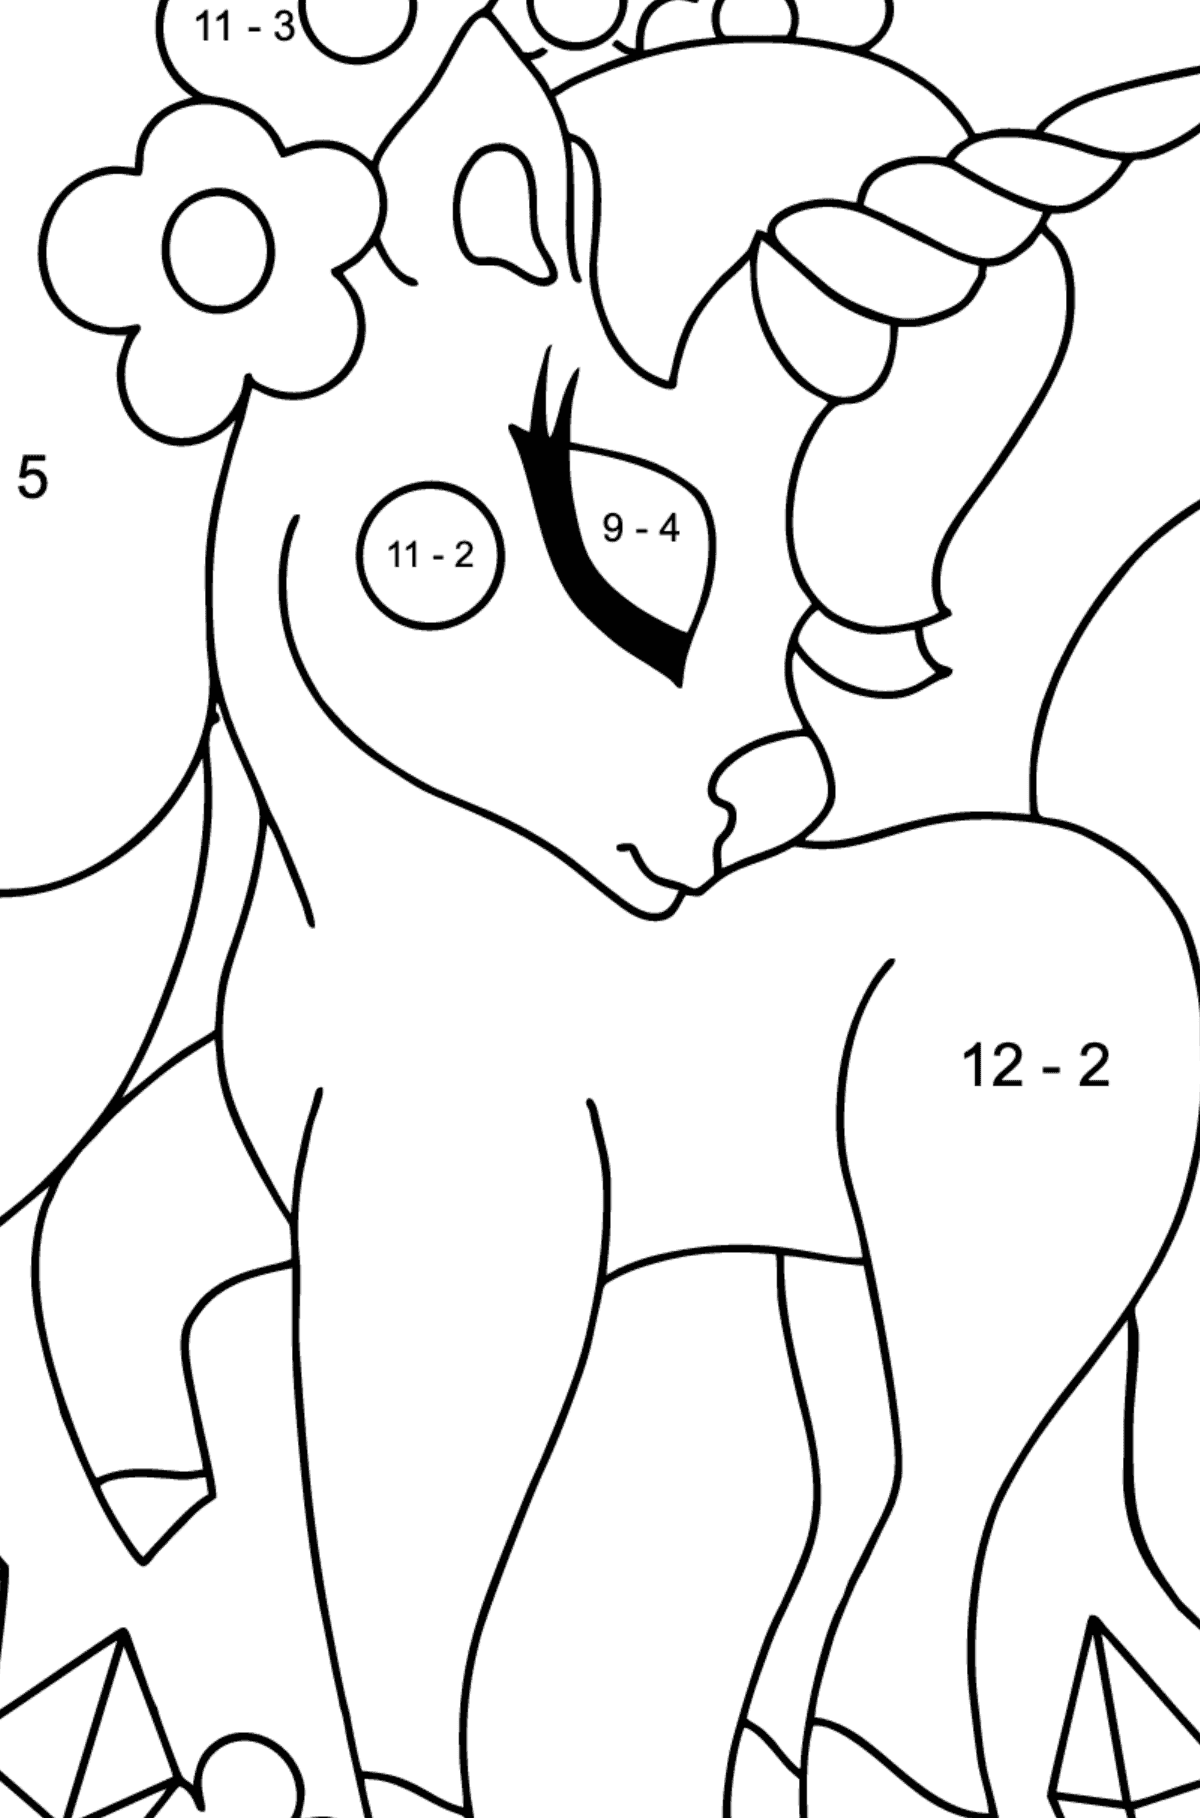 Simple Unicorn Coloring Book for Kids ♥ Online and Print for Free